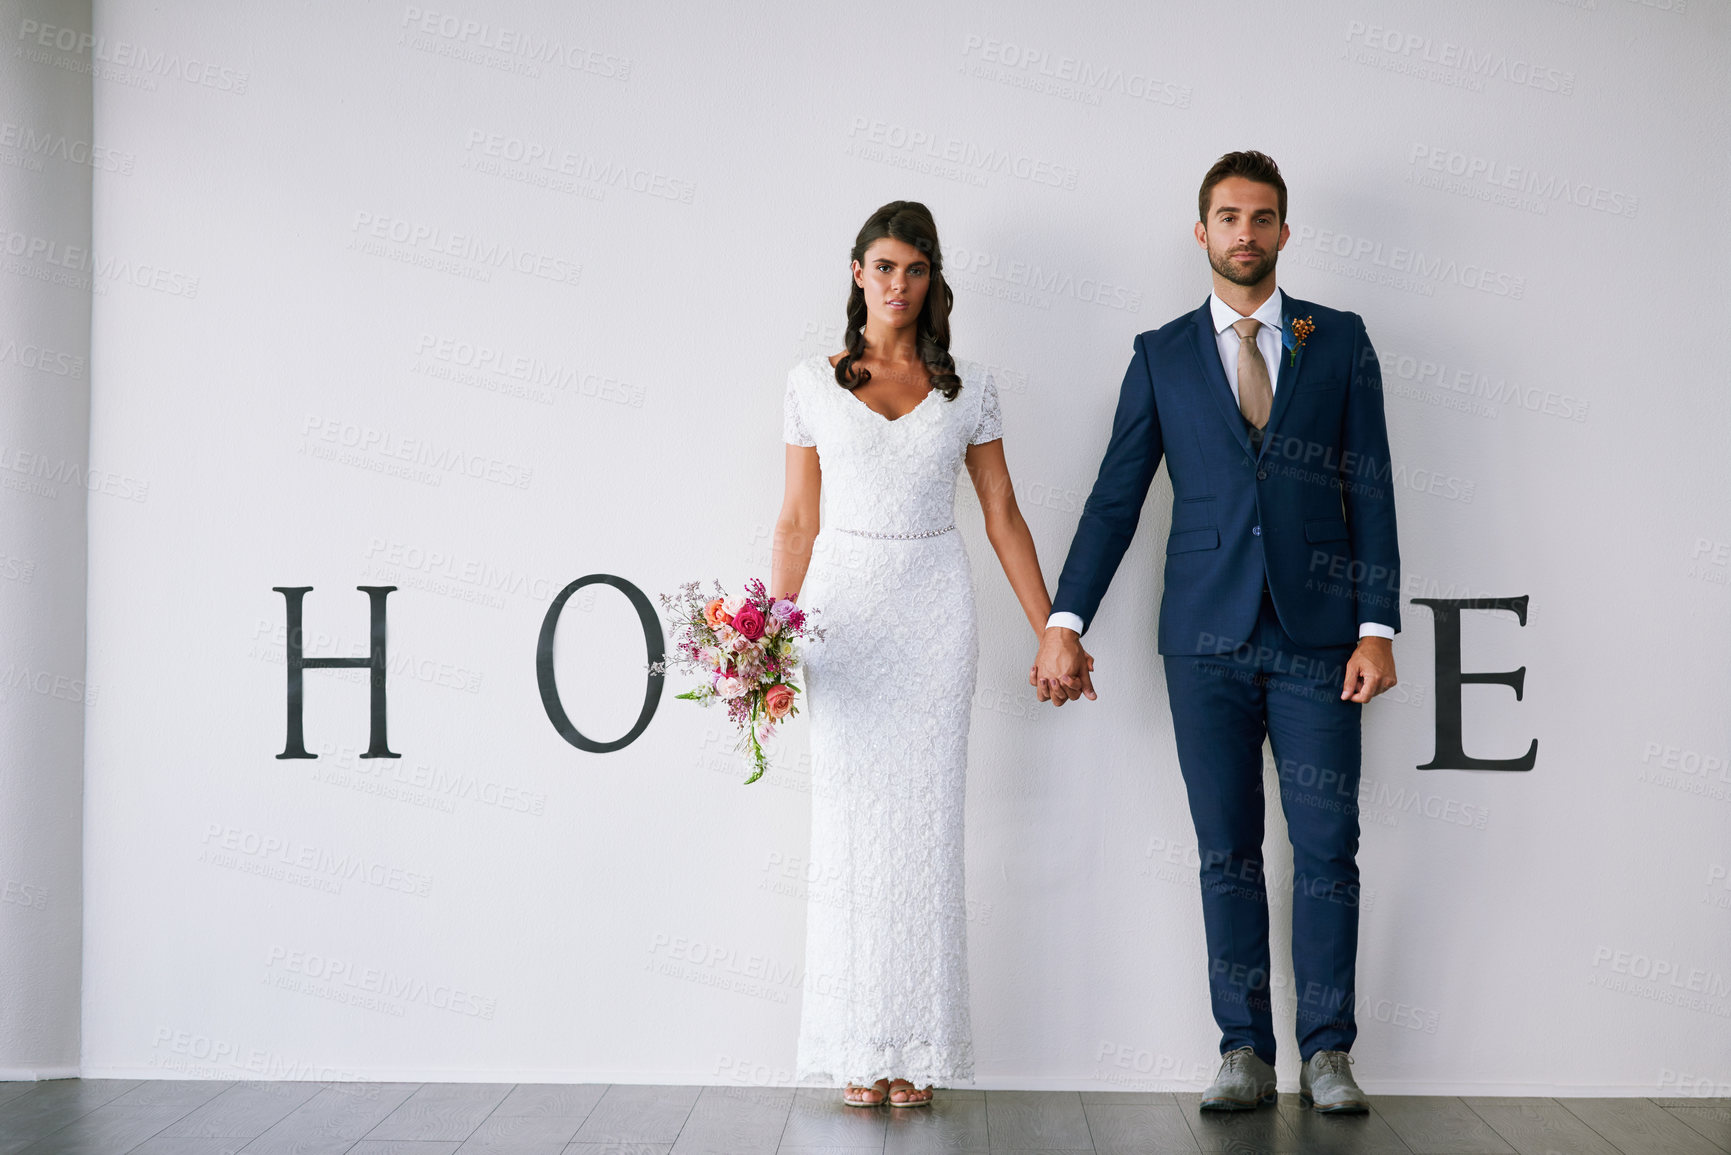 Buy stock photo Concept studio portrait of a bride and groom making an M in the word “home” against a wall